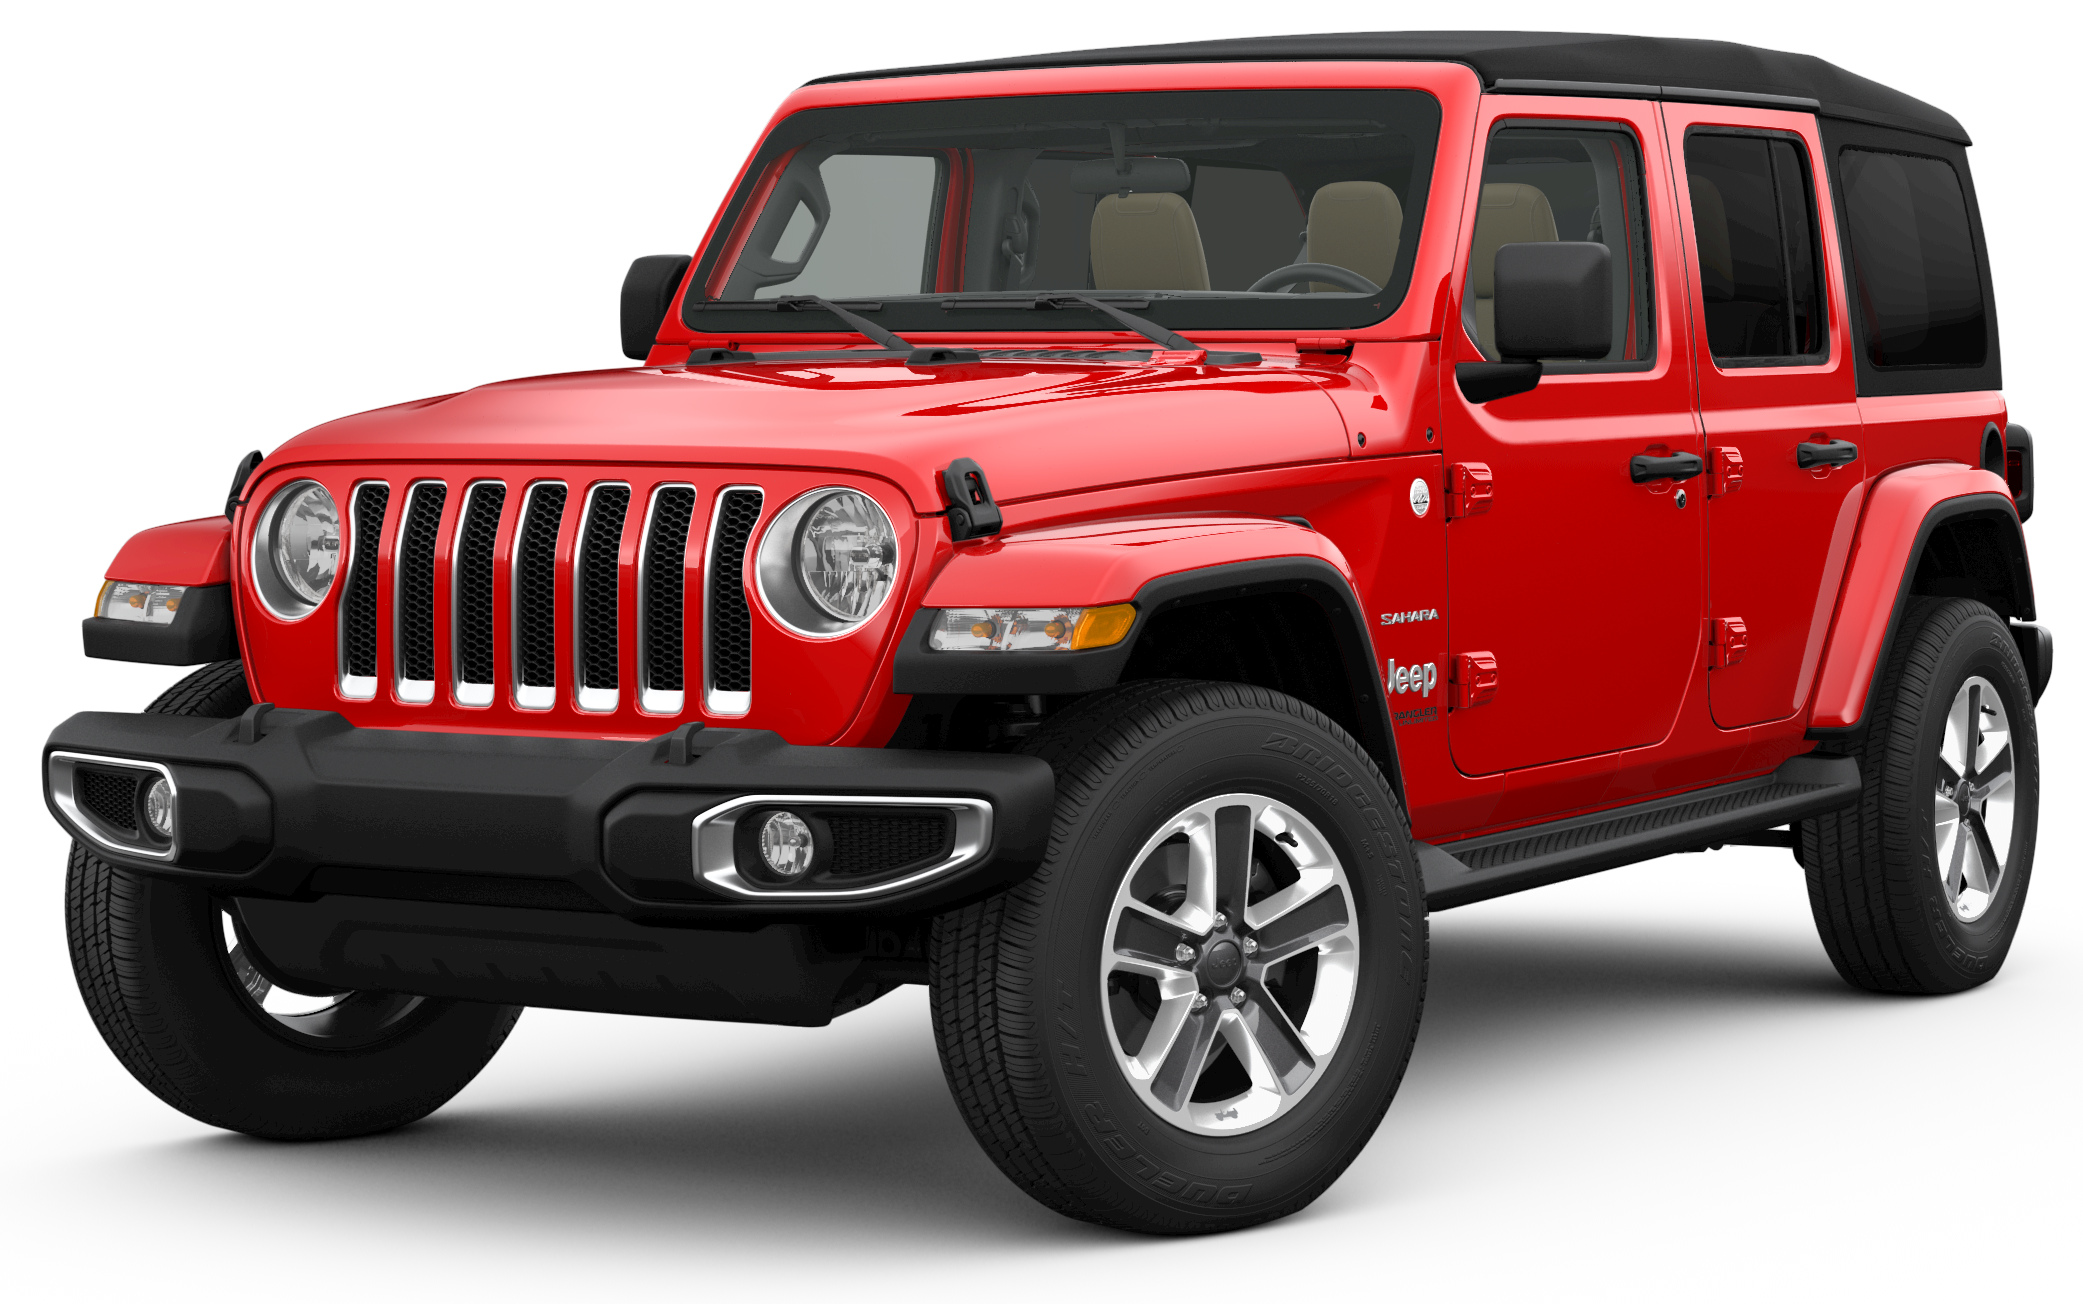 2018 Jeep Wrangler Incentives, Specials & Offers in Rochester Hills MI